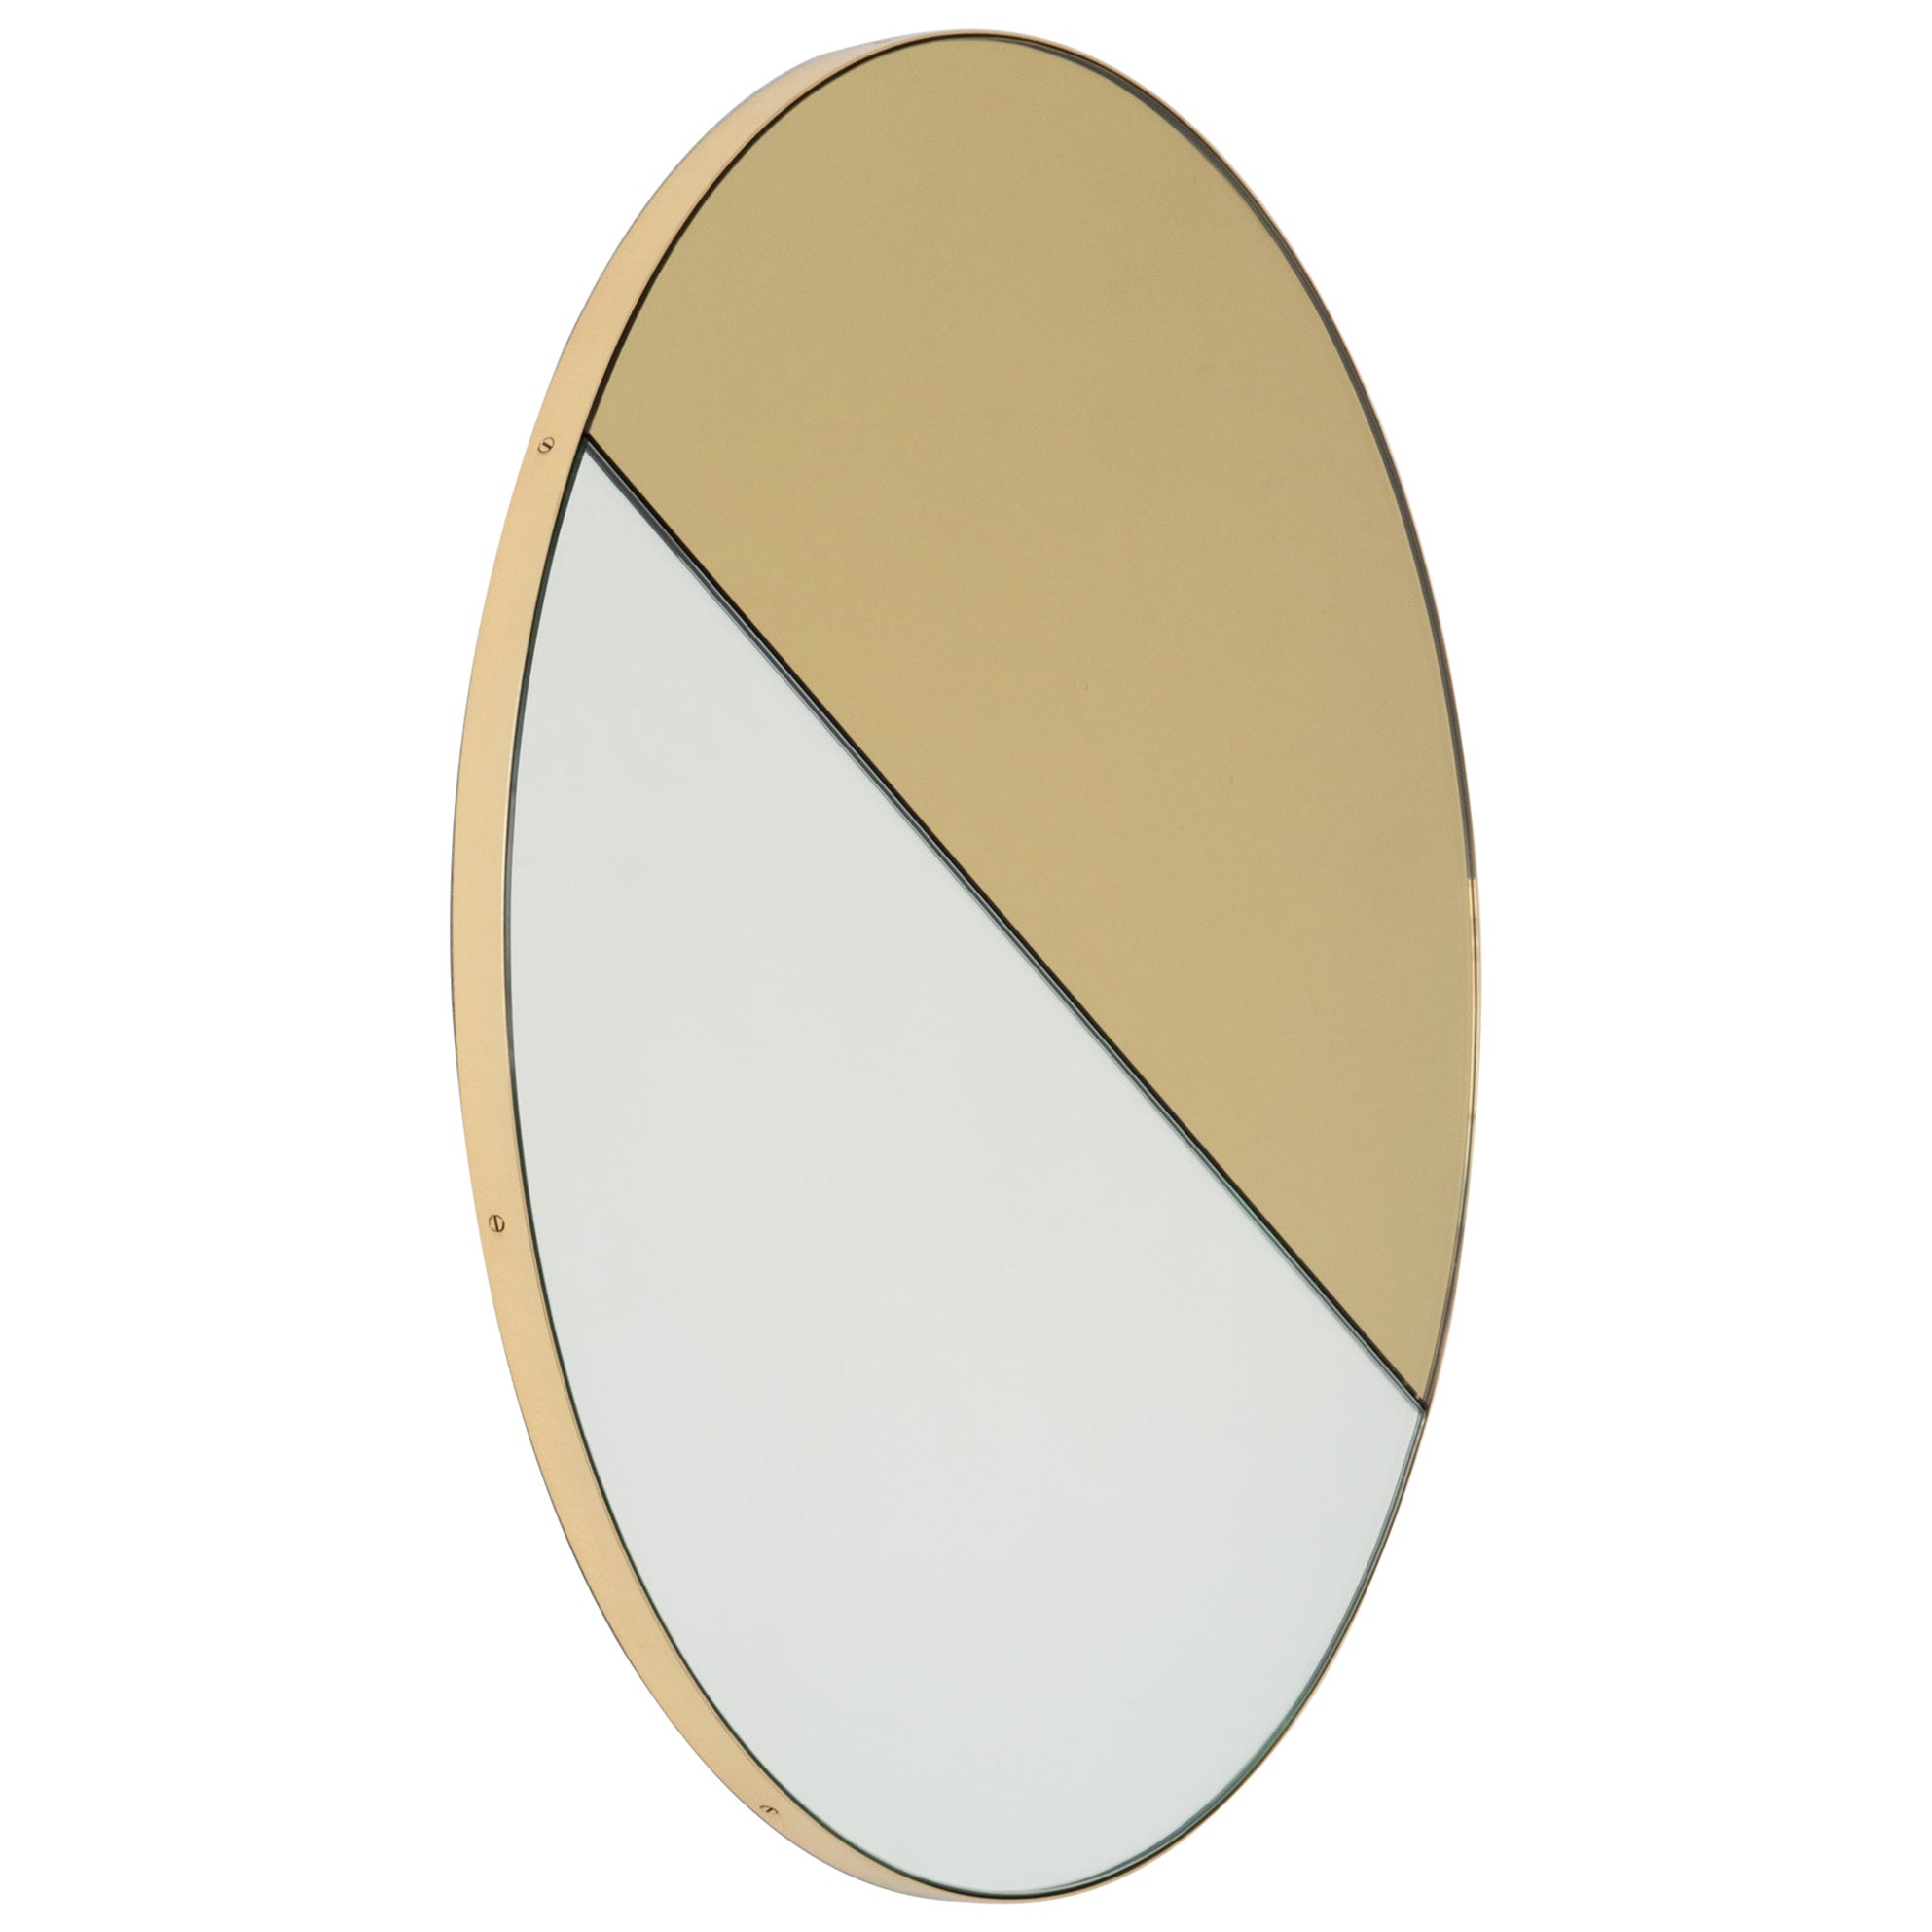 Orbis Dualis Mixed Gold Silver Tinted Round Mirror with Brass Frame, Small For Sale